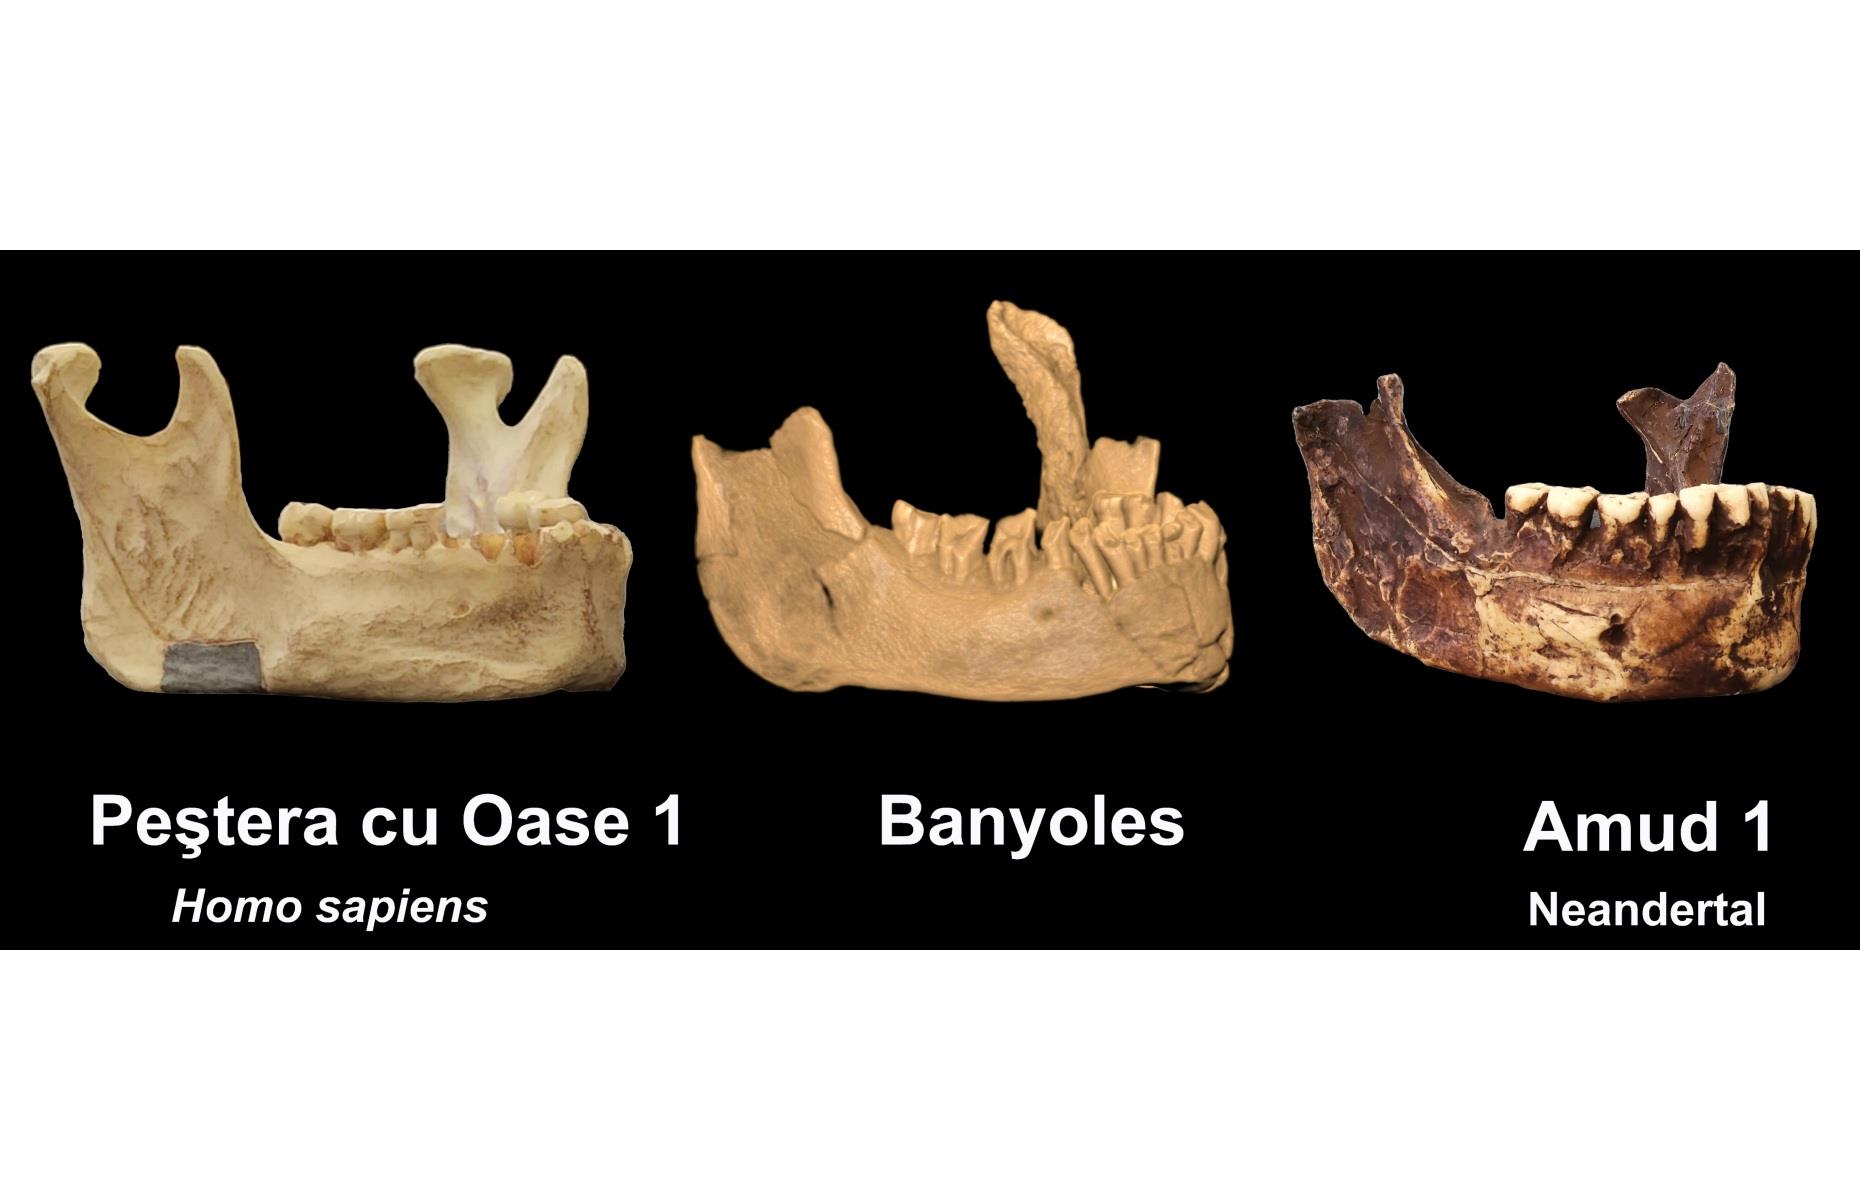 <p>In 1887, one of the earliest human fossils ever found was unearthed in a quarry near the Spanish town of Banyoles, and was quickly categorised as the jawbone of a Neanderthal (or Neandertal) – an extinct human subspecies that died out 40,000 years ago. In 2022, groundbreaking new analysis by researchers at Binghamton University, New York suggests that the frequently-studied bone might instead mark the oldest known presence of Homo sapiens in Europe. The team found it "shared no distinct Neanderthal traits", and could place modern humans in Europe up to 65,000 years ago. One mystery remains, as the bone lacks one crucial Homo sapiens trait: a chin.</p>